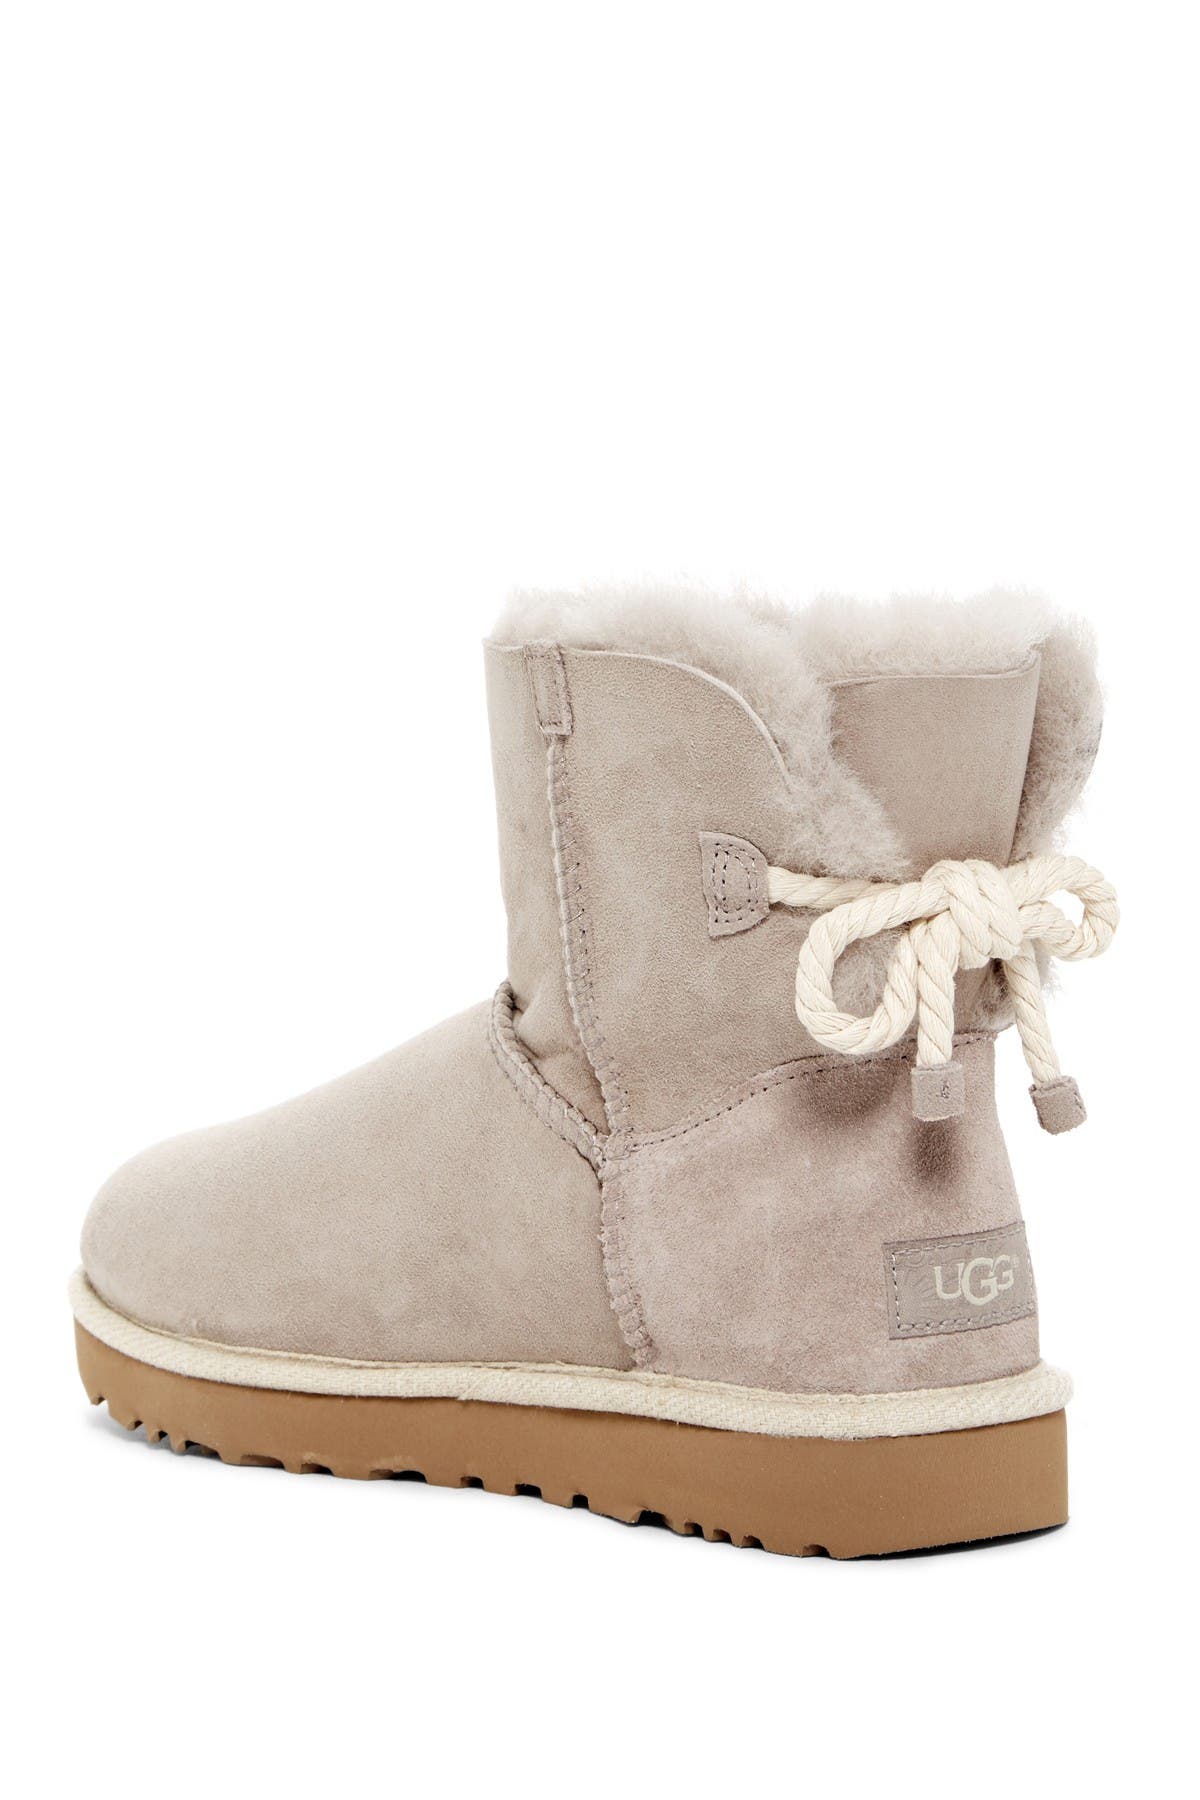 ugg boots with rope bow